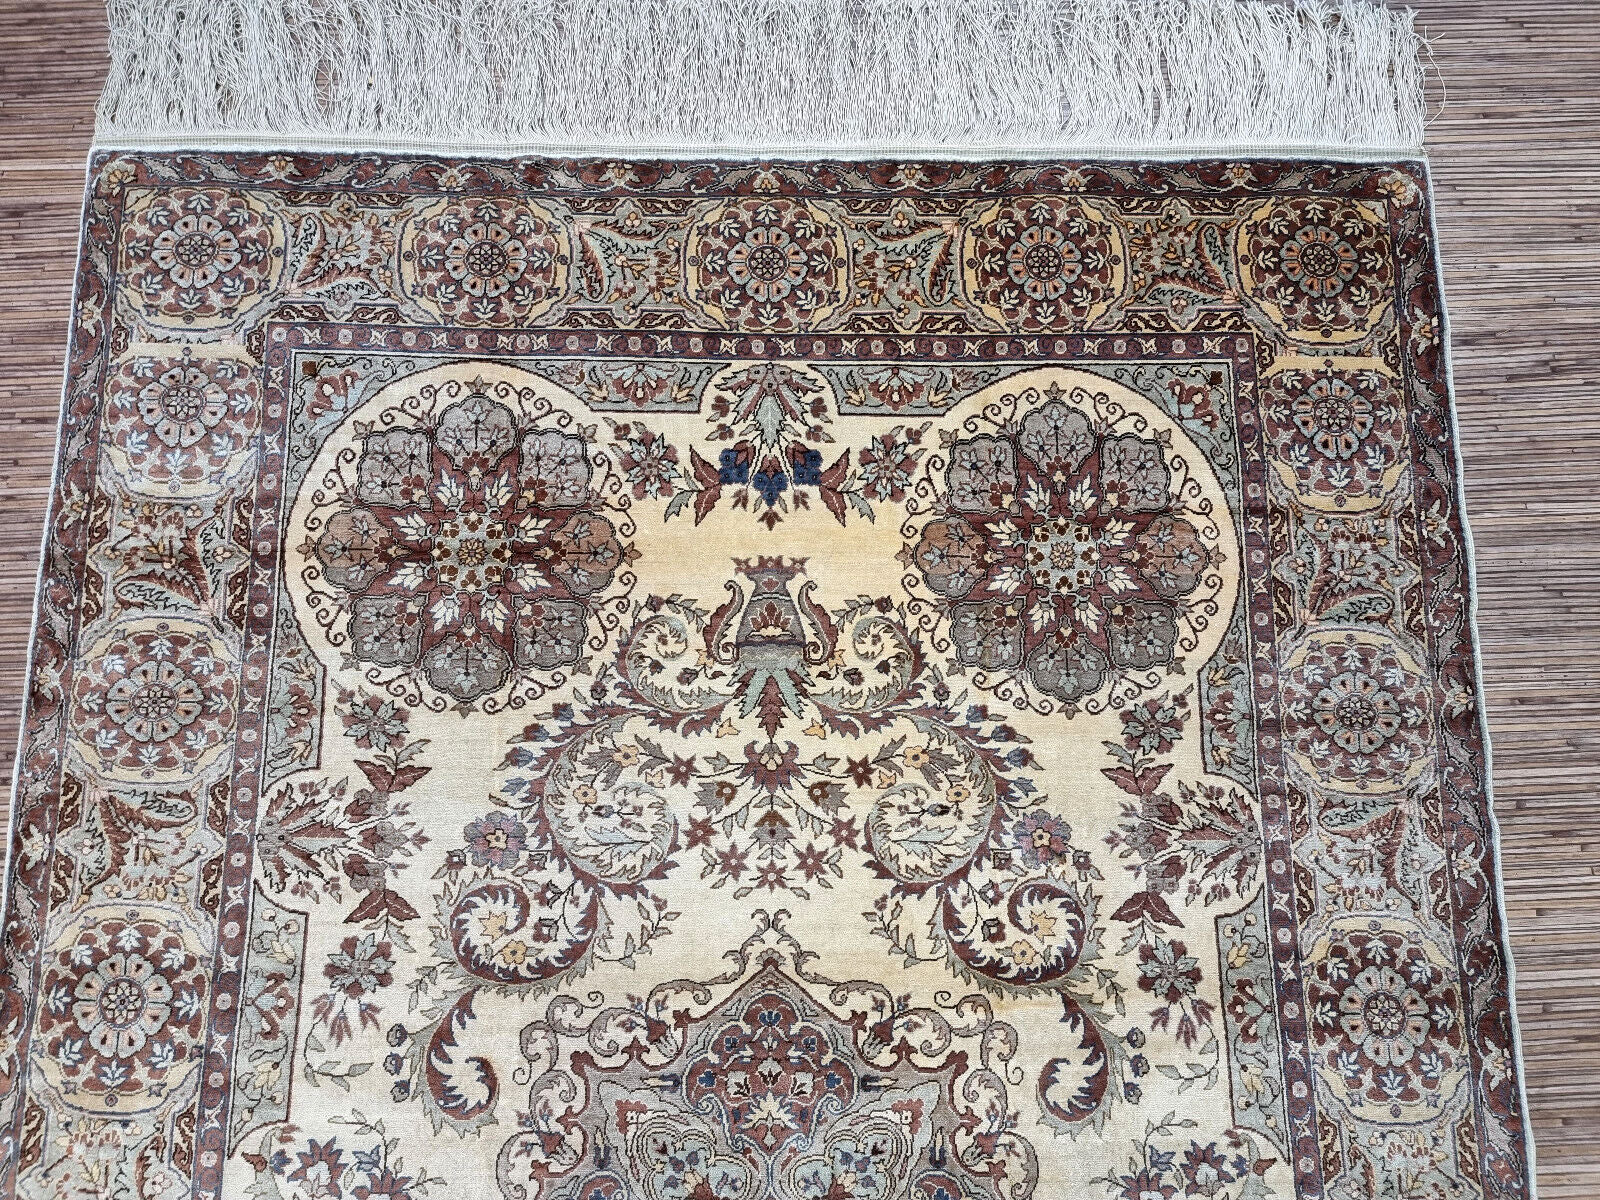 Handmade vintage Turkish Kayseri rug made in silk. The rug is from the end of 20th century in original good condition.